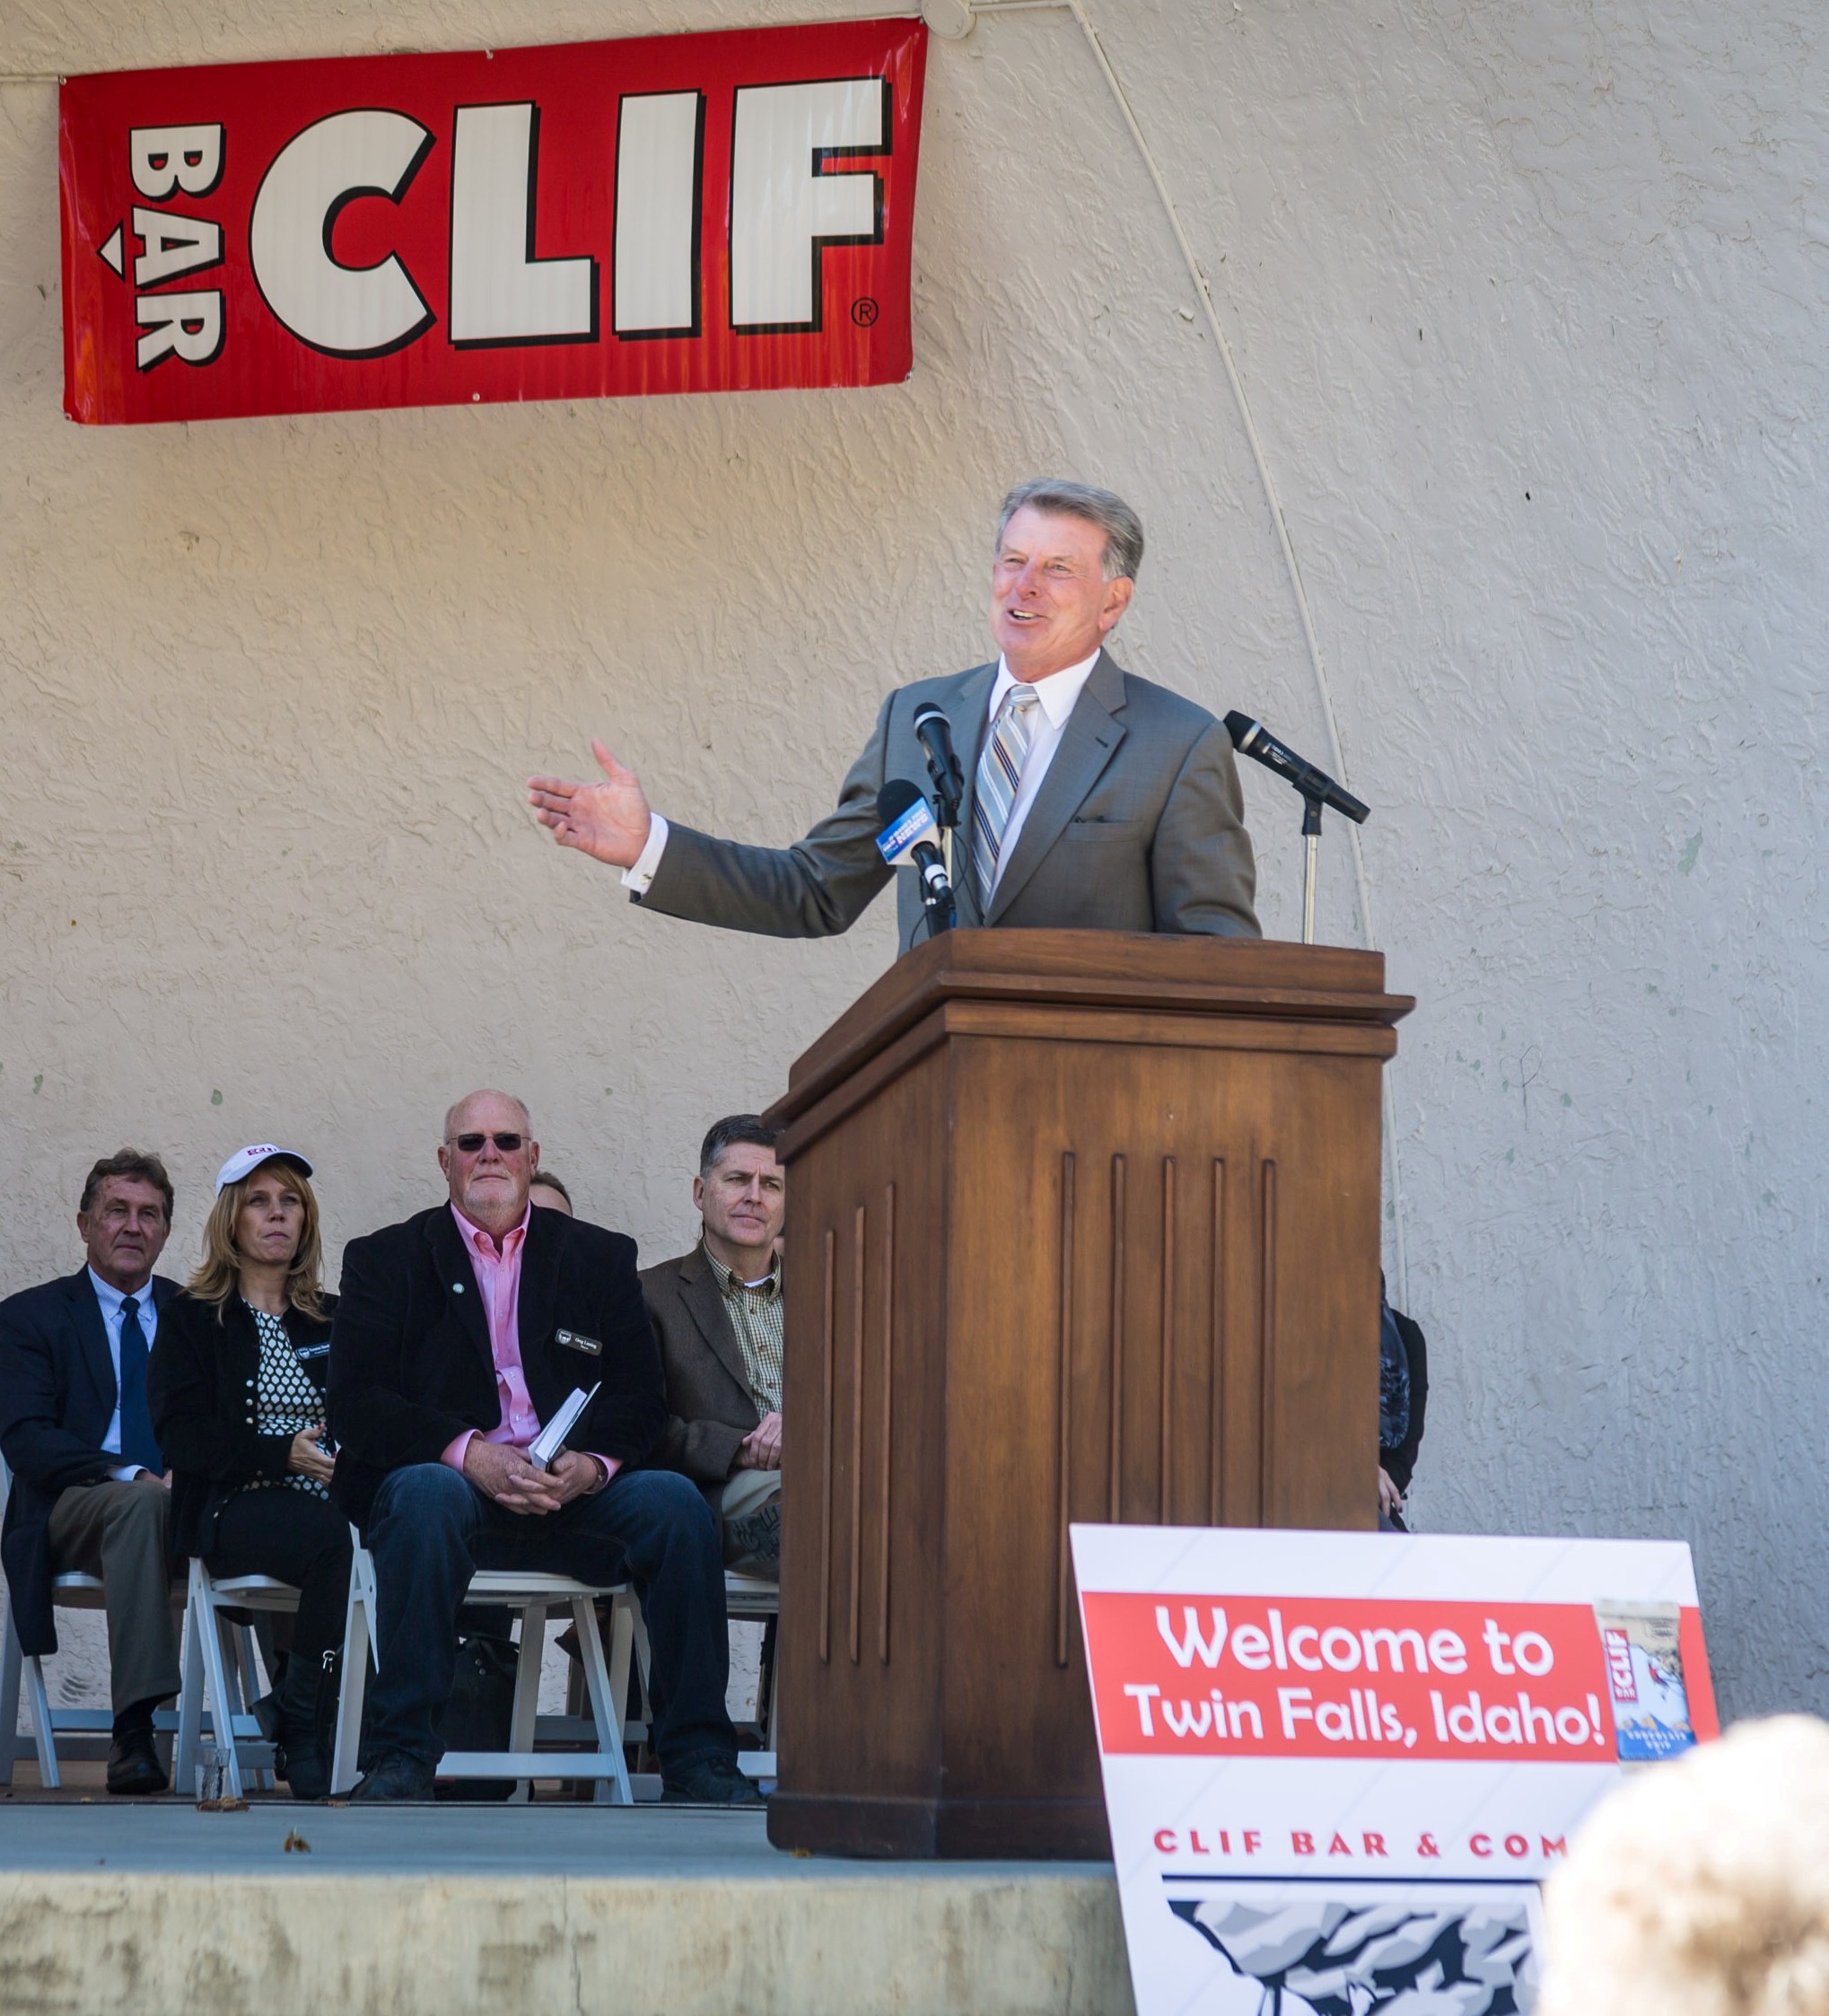 Idaho Governor C.L. “Butch” Otter welcomes Clif Bar to Twin Falls at Clif Bar’s October 2013 announcement to invest $160 million to build a state-of-the-art LEED Silver certified bakery.